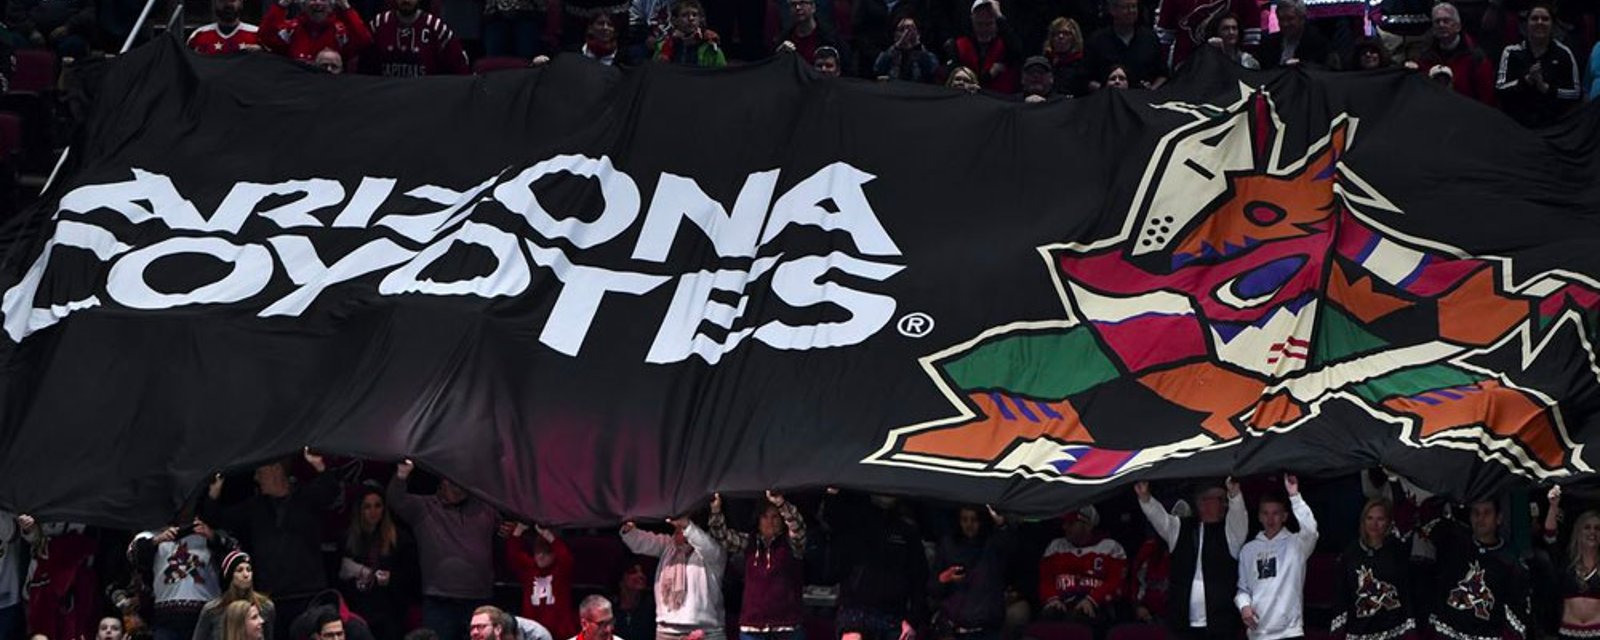 Report: Coyotes embroiled in legal battle, relocation now more possible than ever